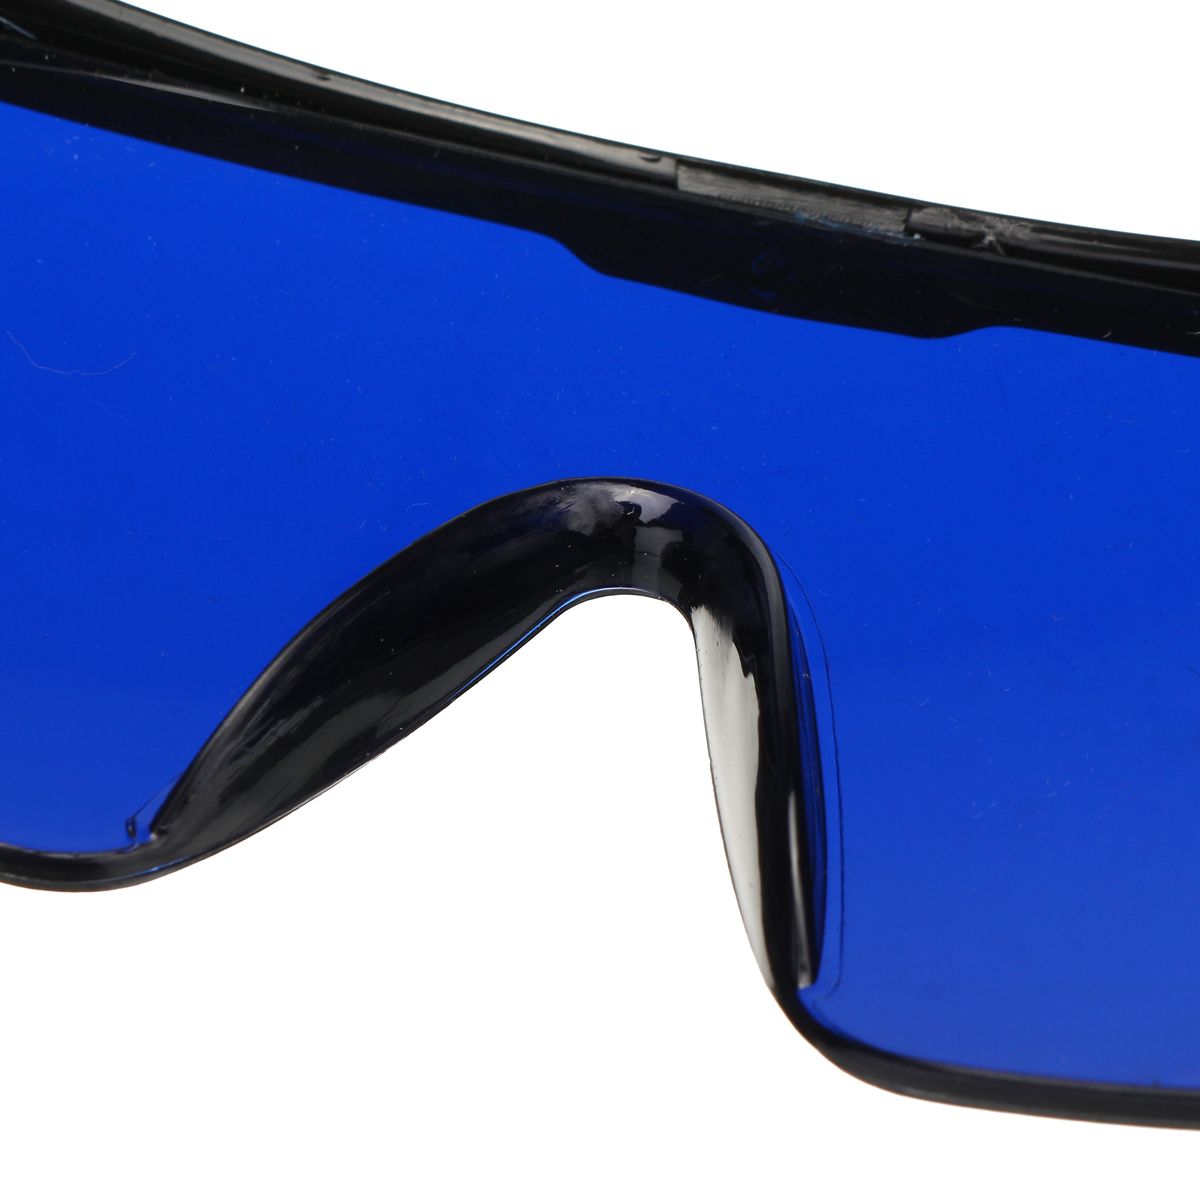 Pro-Laser-Protection-Goggles-Protective-Safety-Glasses-IPL-OD4D-190nm-2000nm-Laser-Goggles-1424199